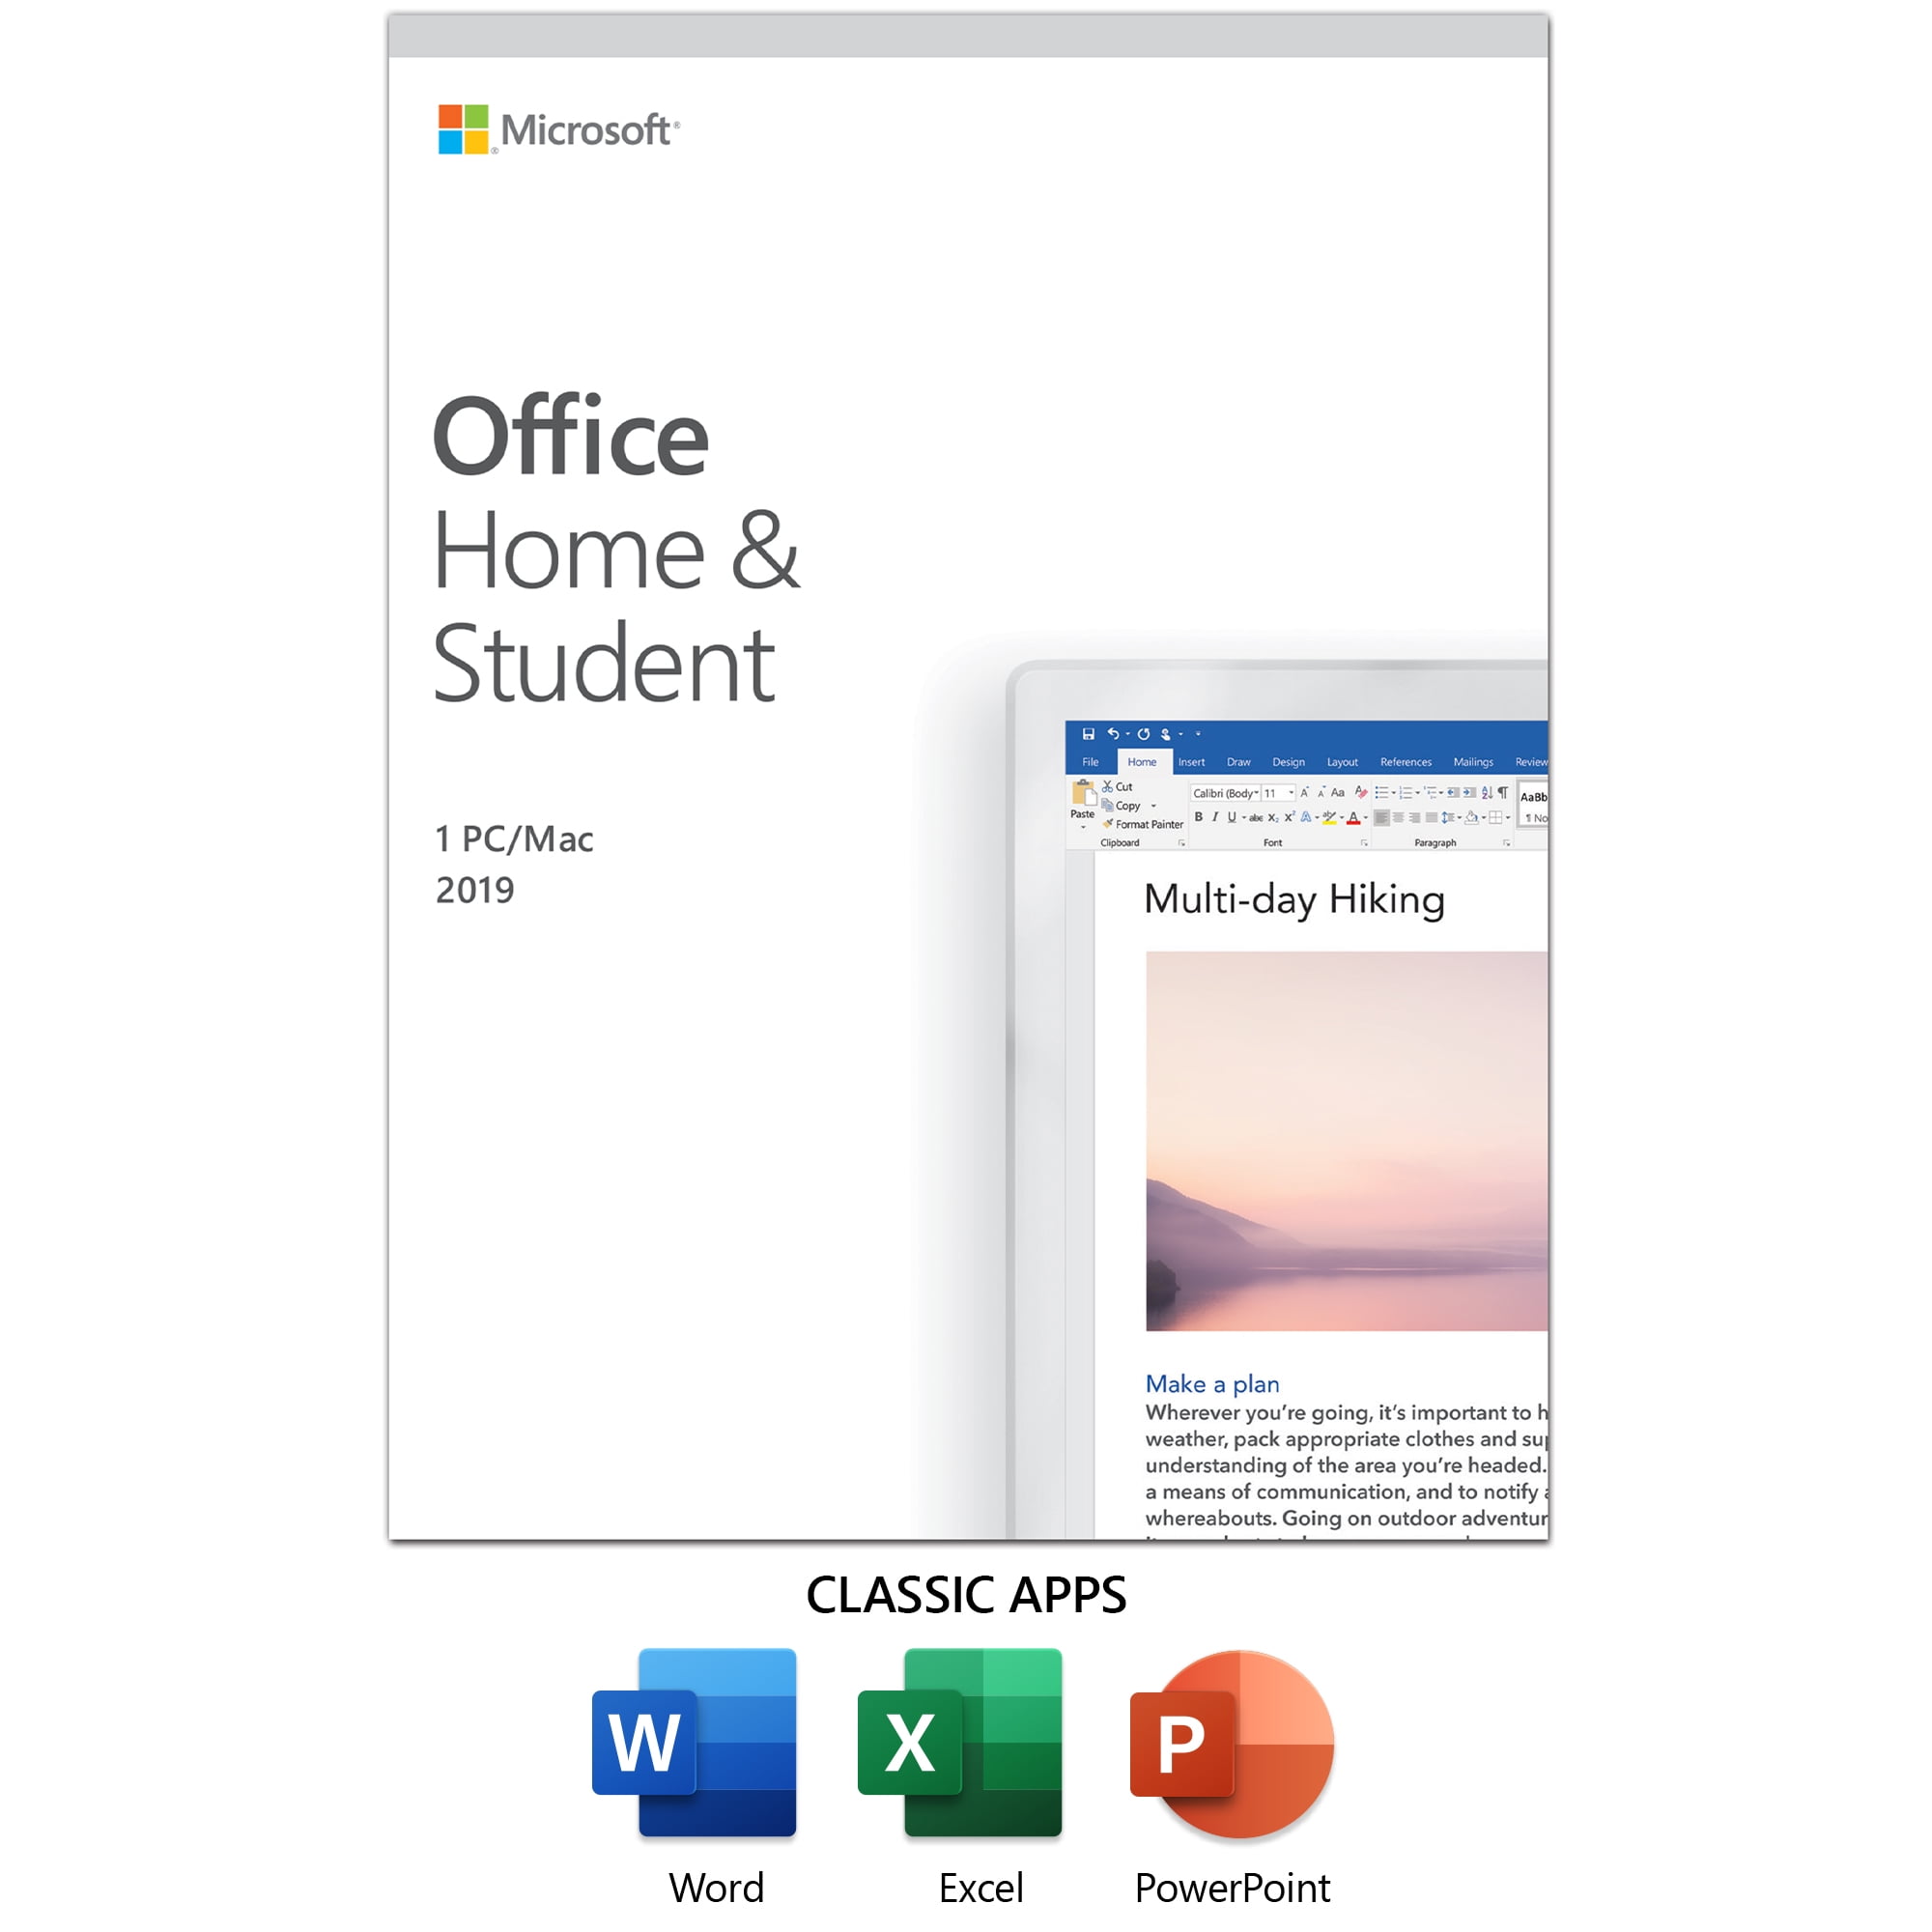 Microsoft Office 365 Personal | 12-month subscription, 1 person 